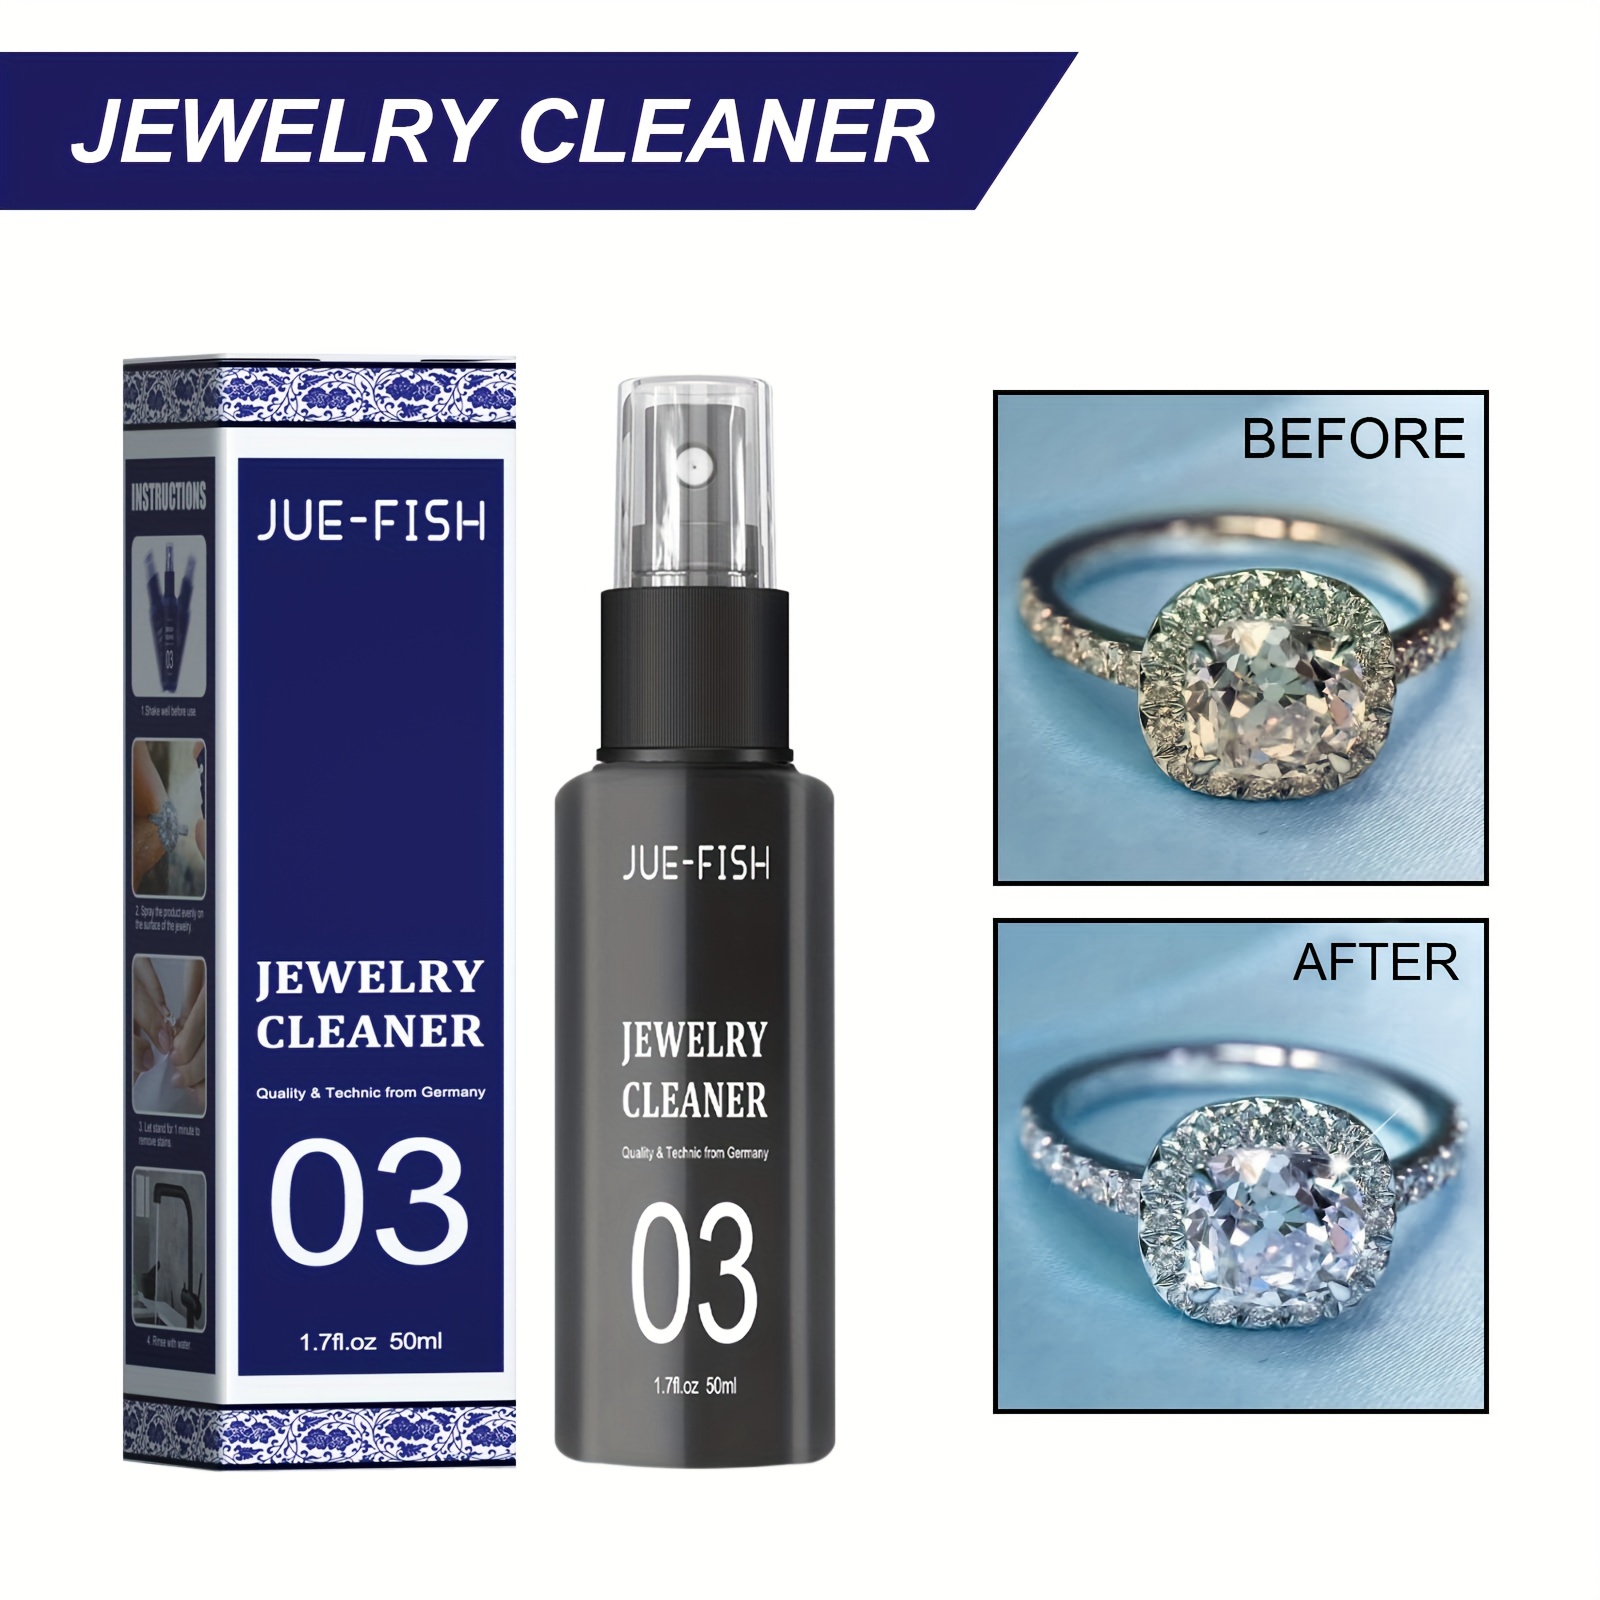 High Frequency Vibration Cleaner, High Frequency Vibration Jewelry Cleaner,  20.29oz Jewelry Cleaner Machine ABS Plastic & 304 Stainless Steel Cleaner